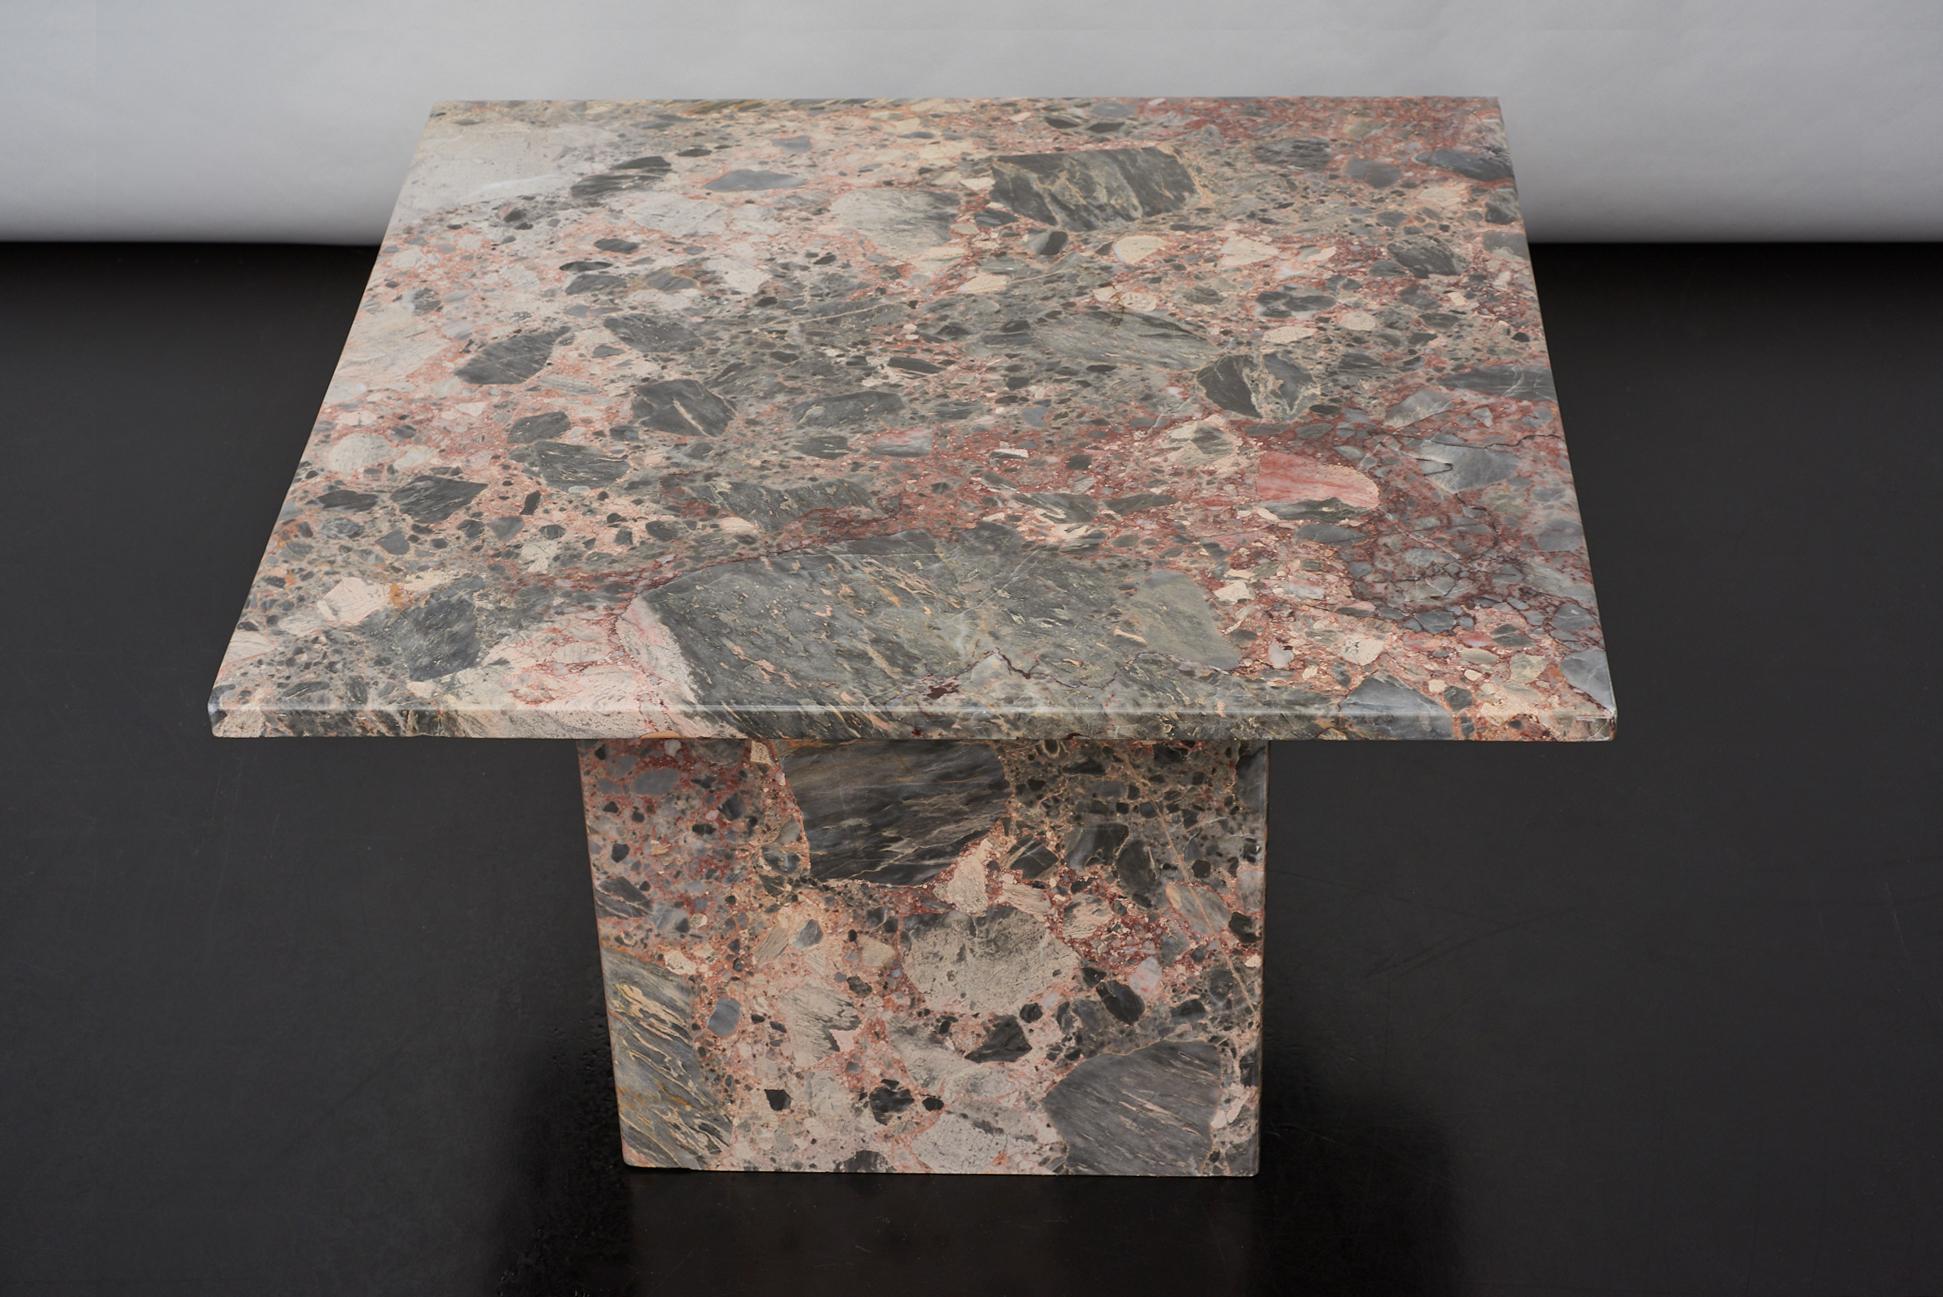 Vintage pink marble side table, italy 1970s. Very good condition.